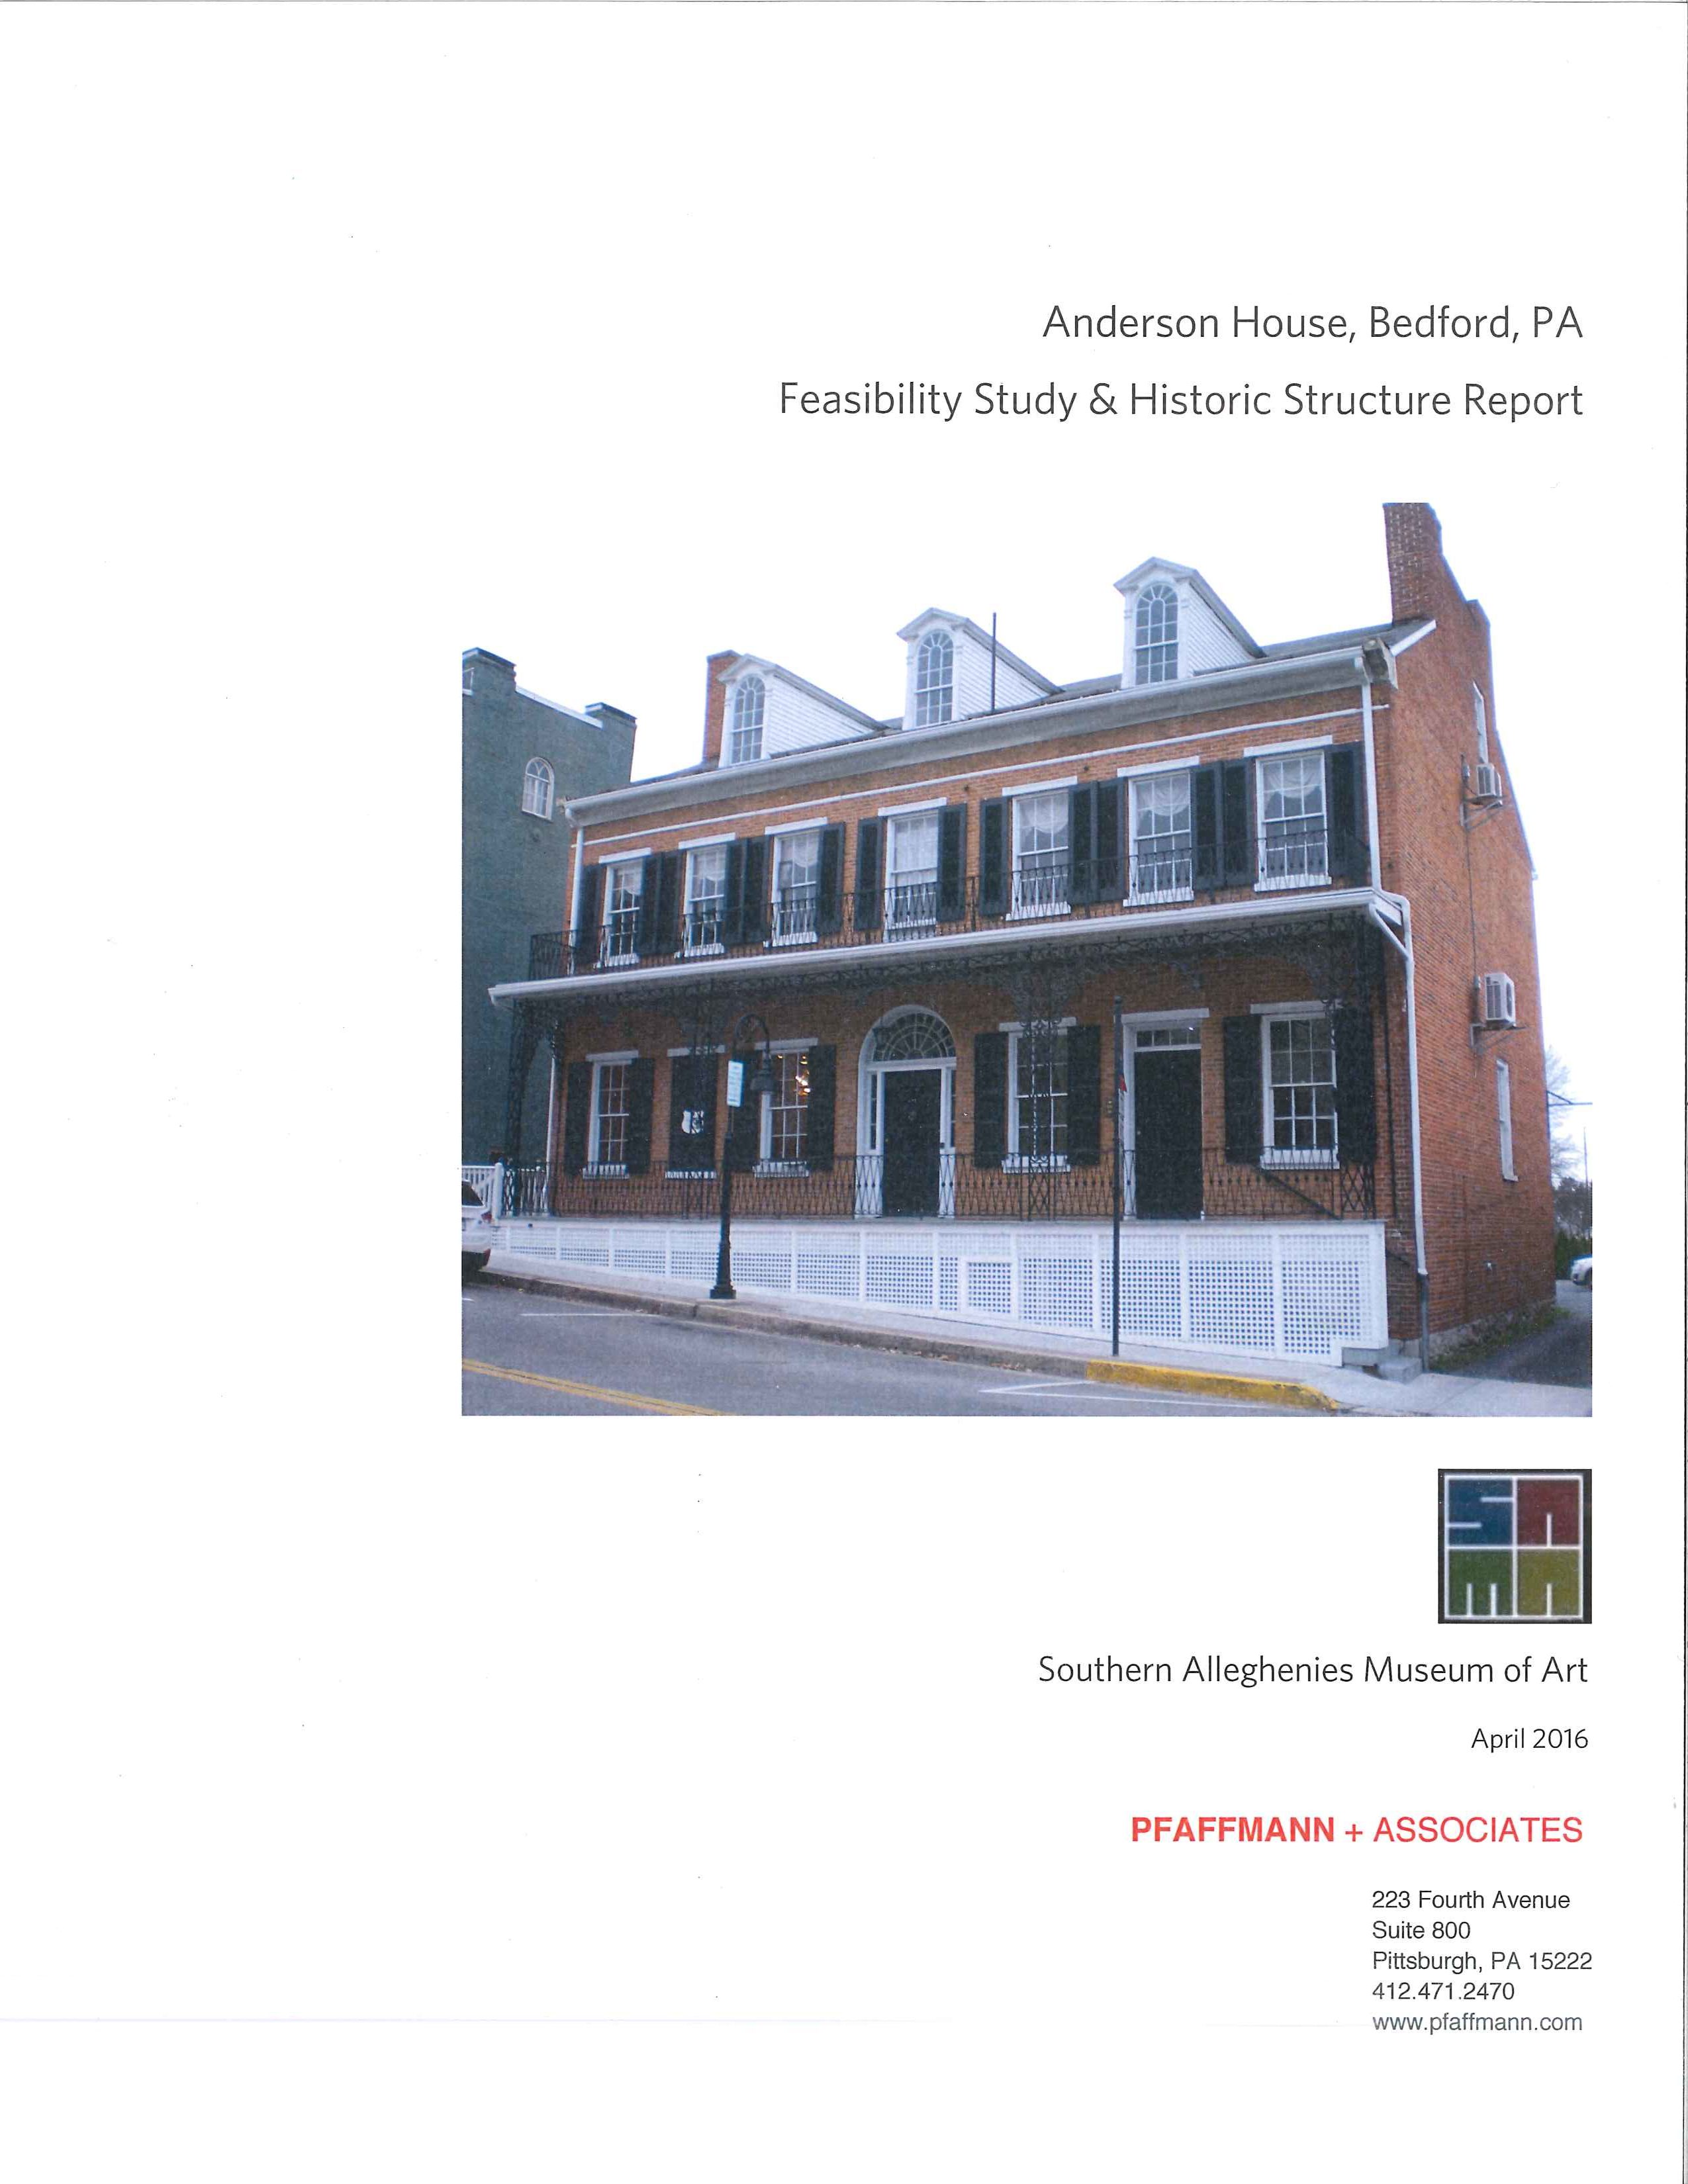 This image shows the front cover of the 2016 feasibility study and historic structure report.